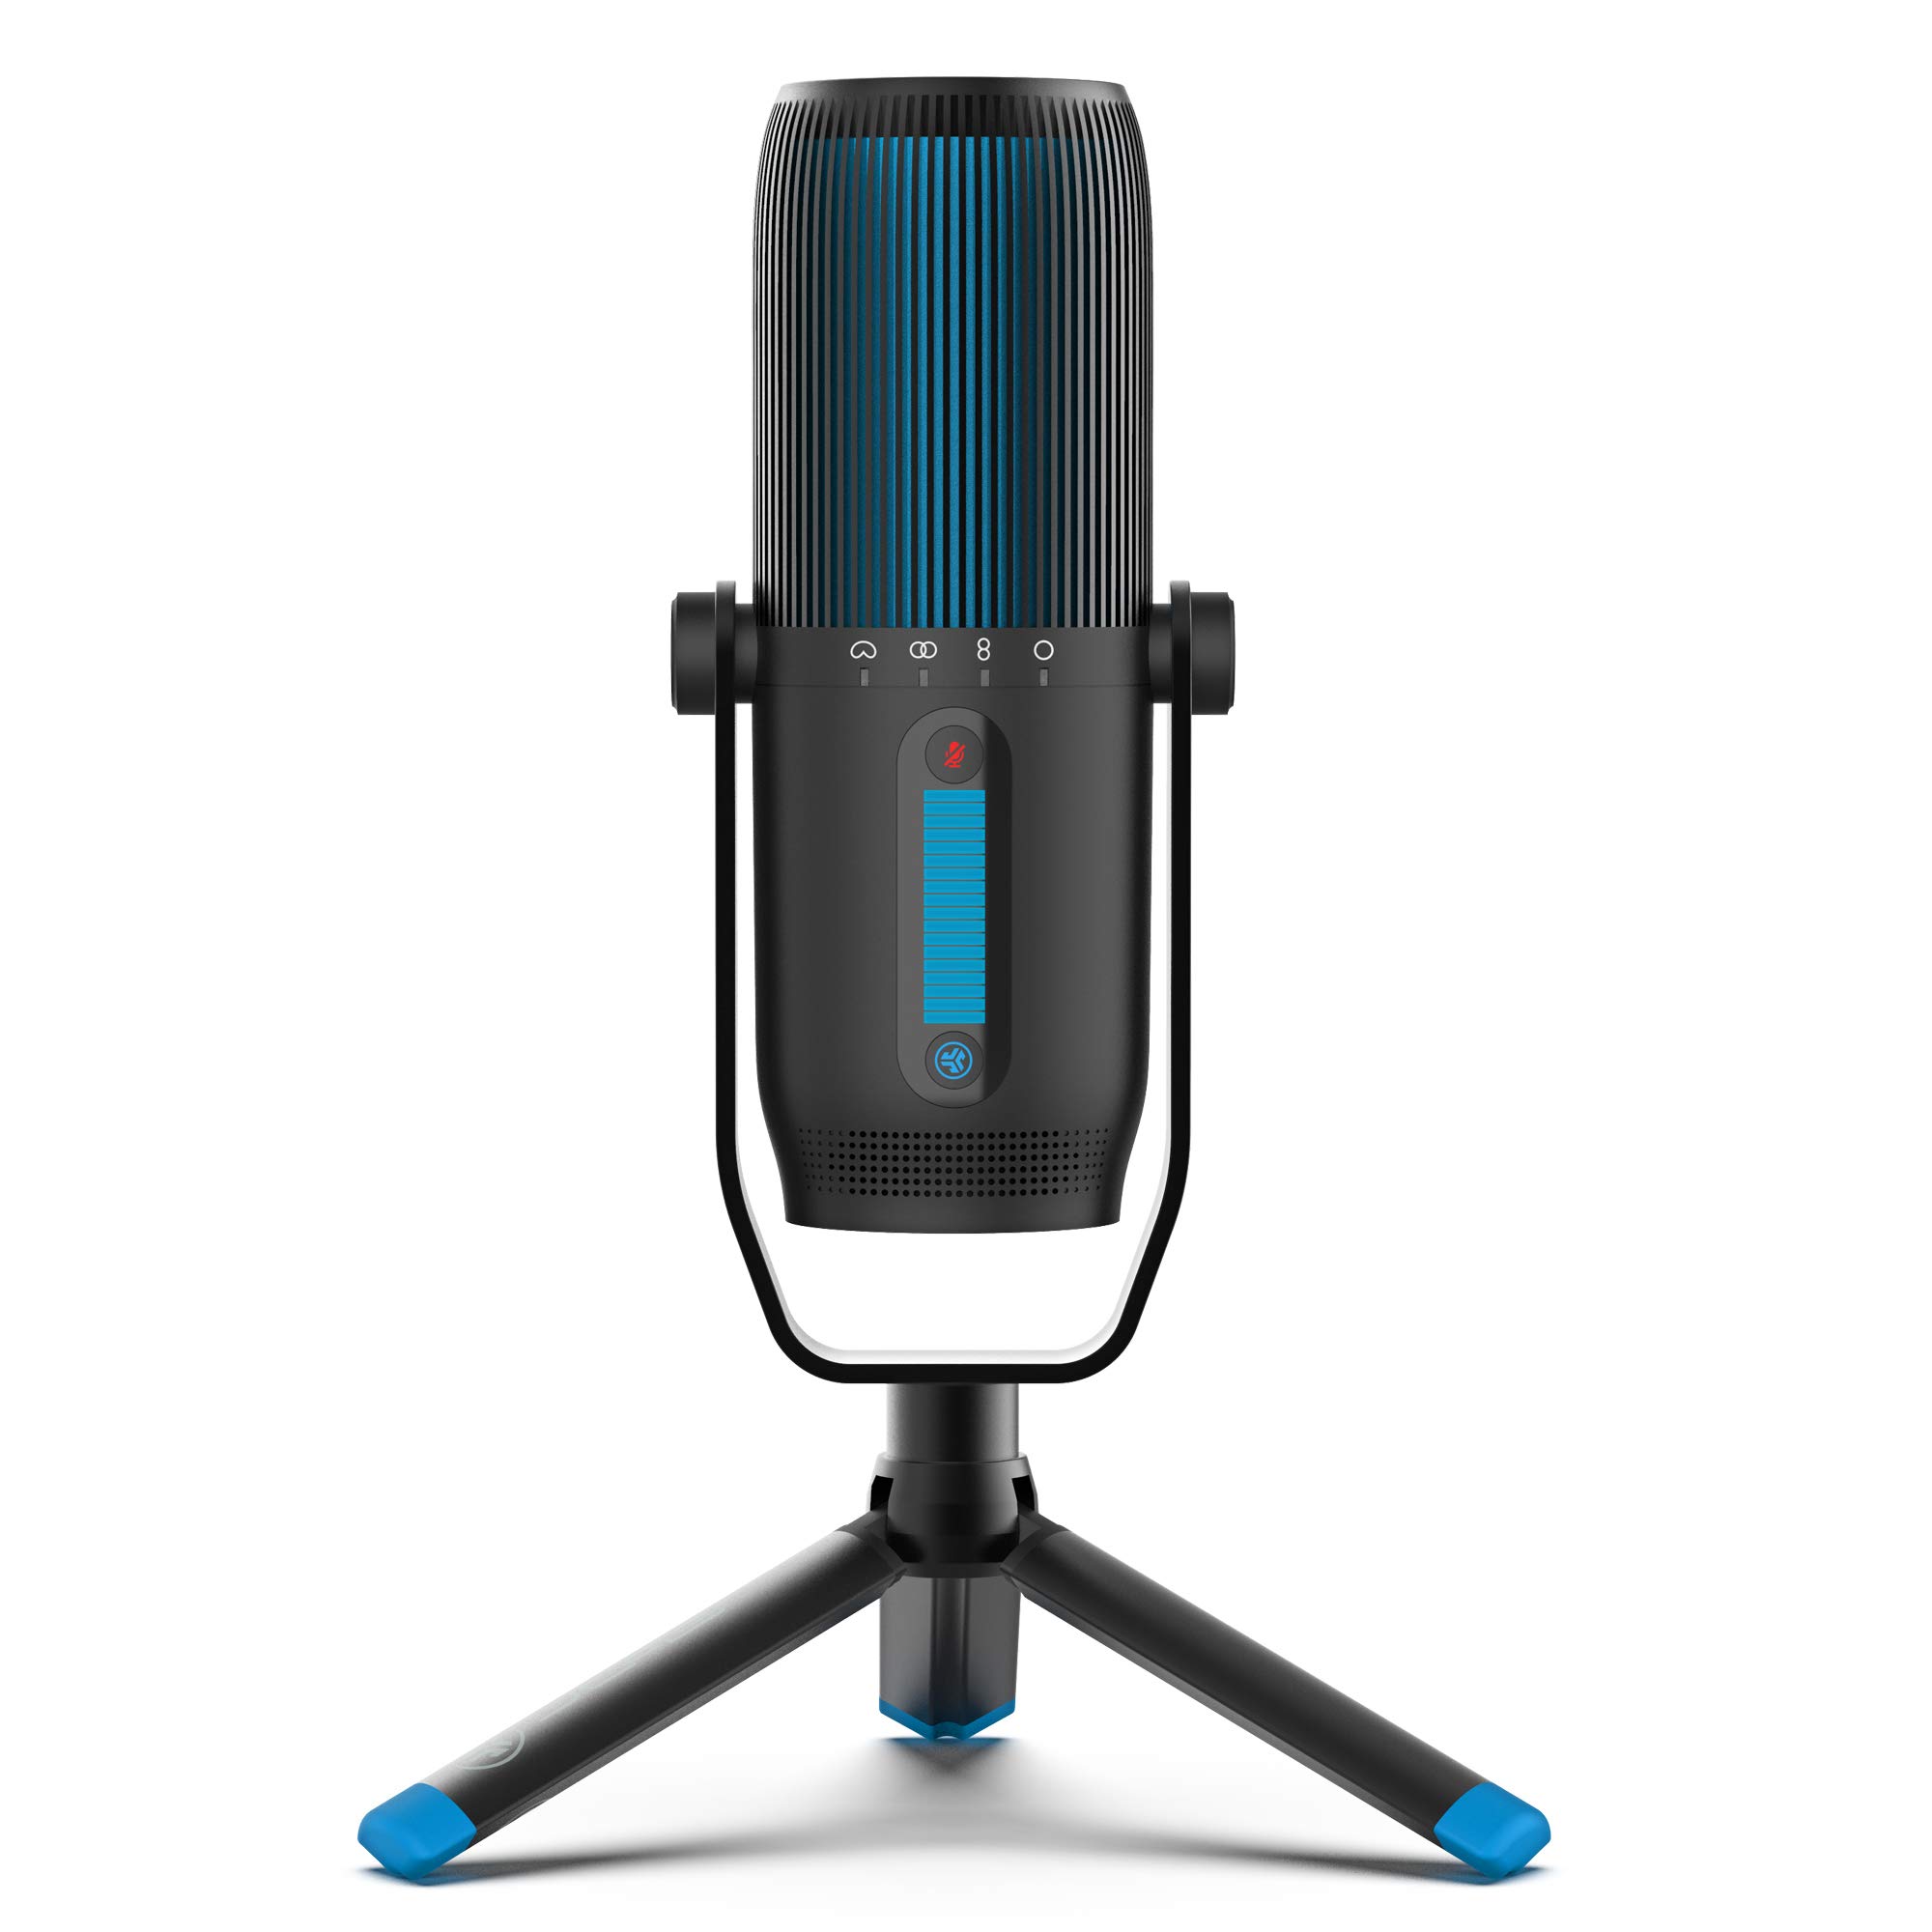 JLab Talk Pro Cardioid Omnidirectional USB Microphone w/ 4 Directional Pattern Modes $40 + Free Shipping